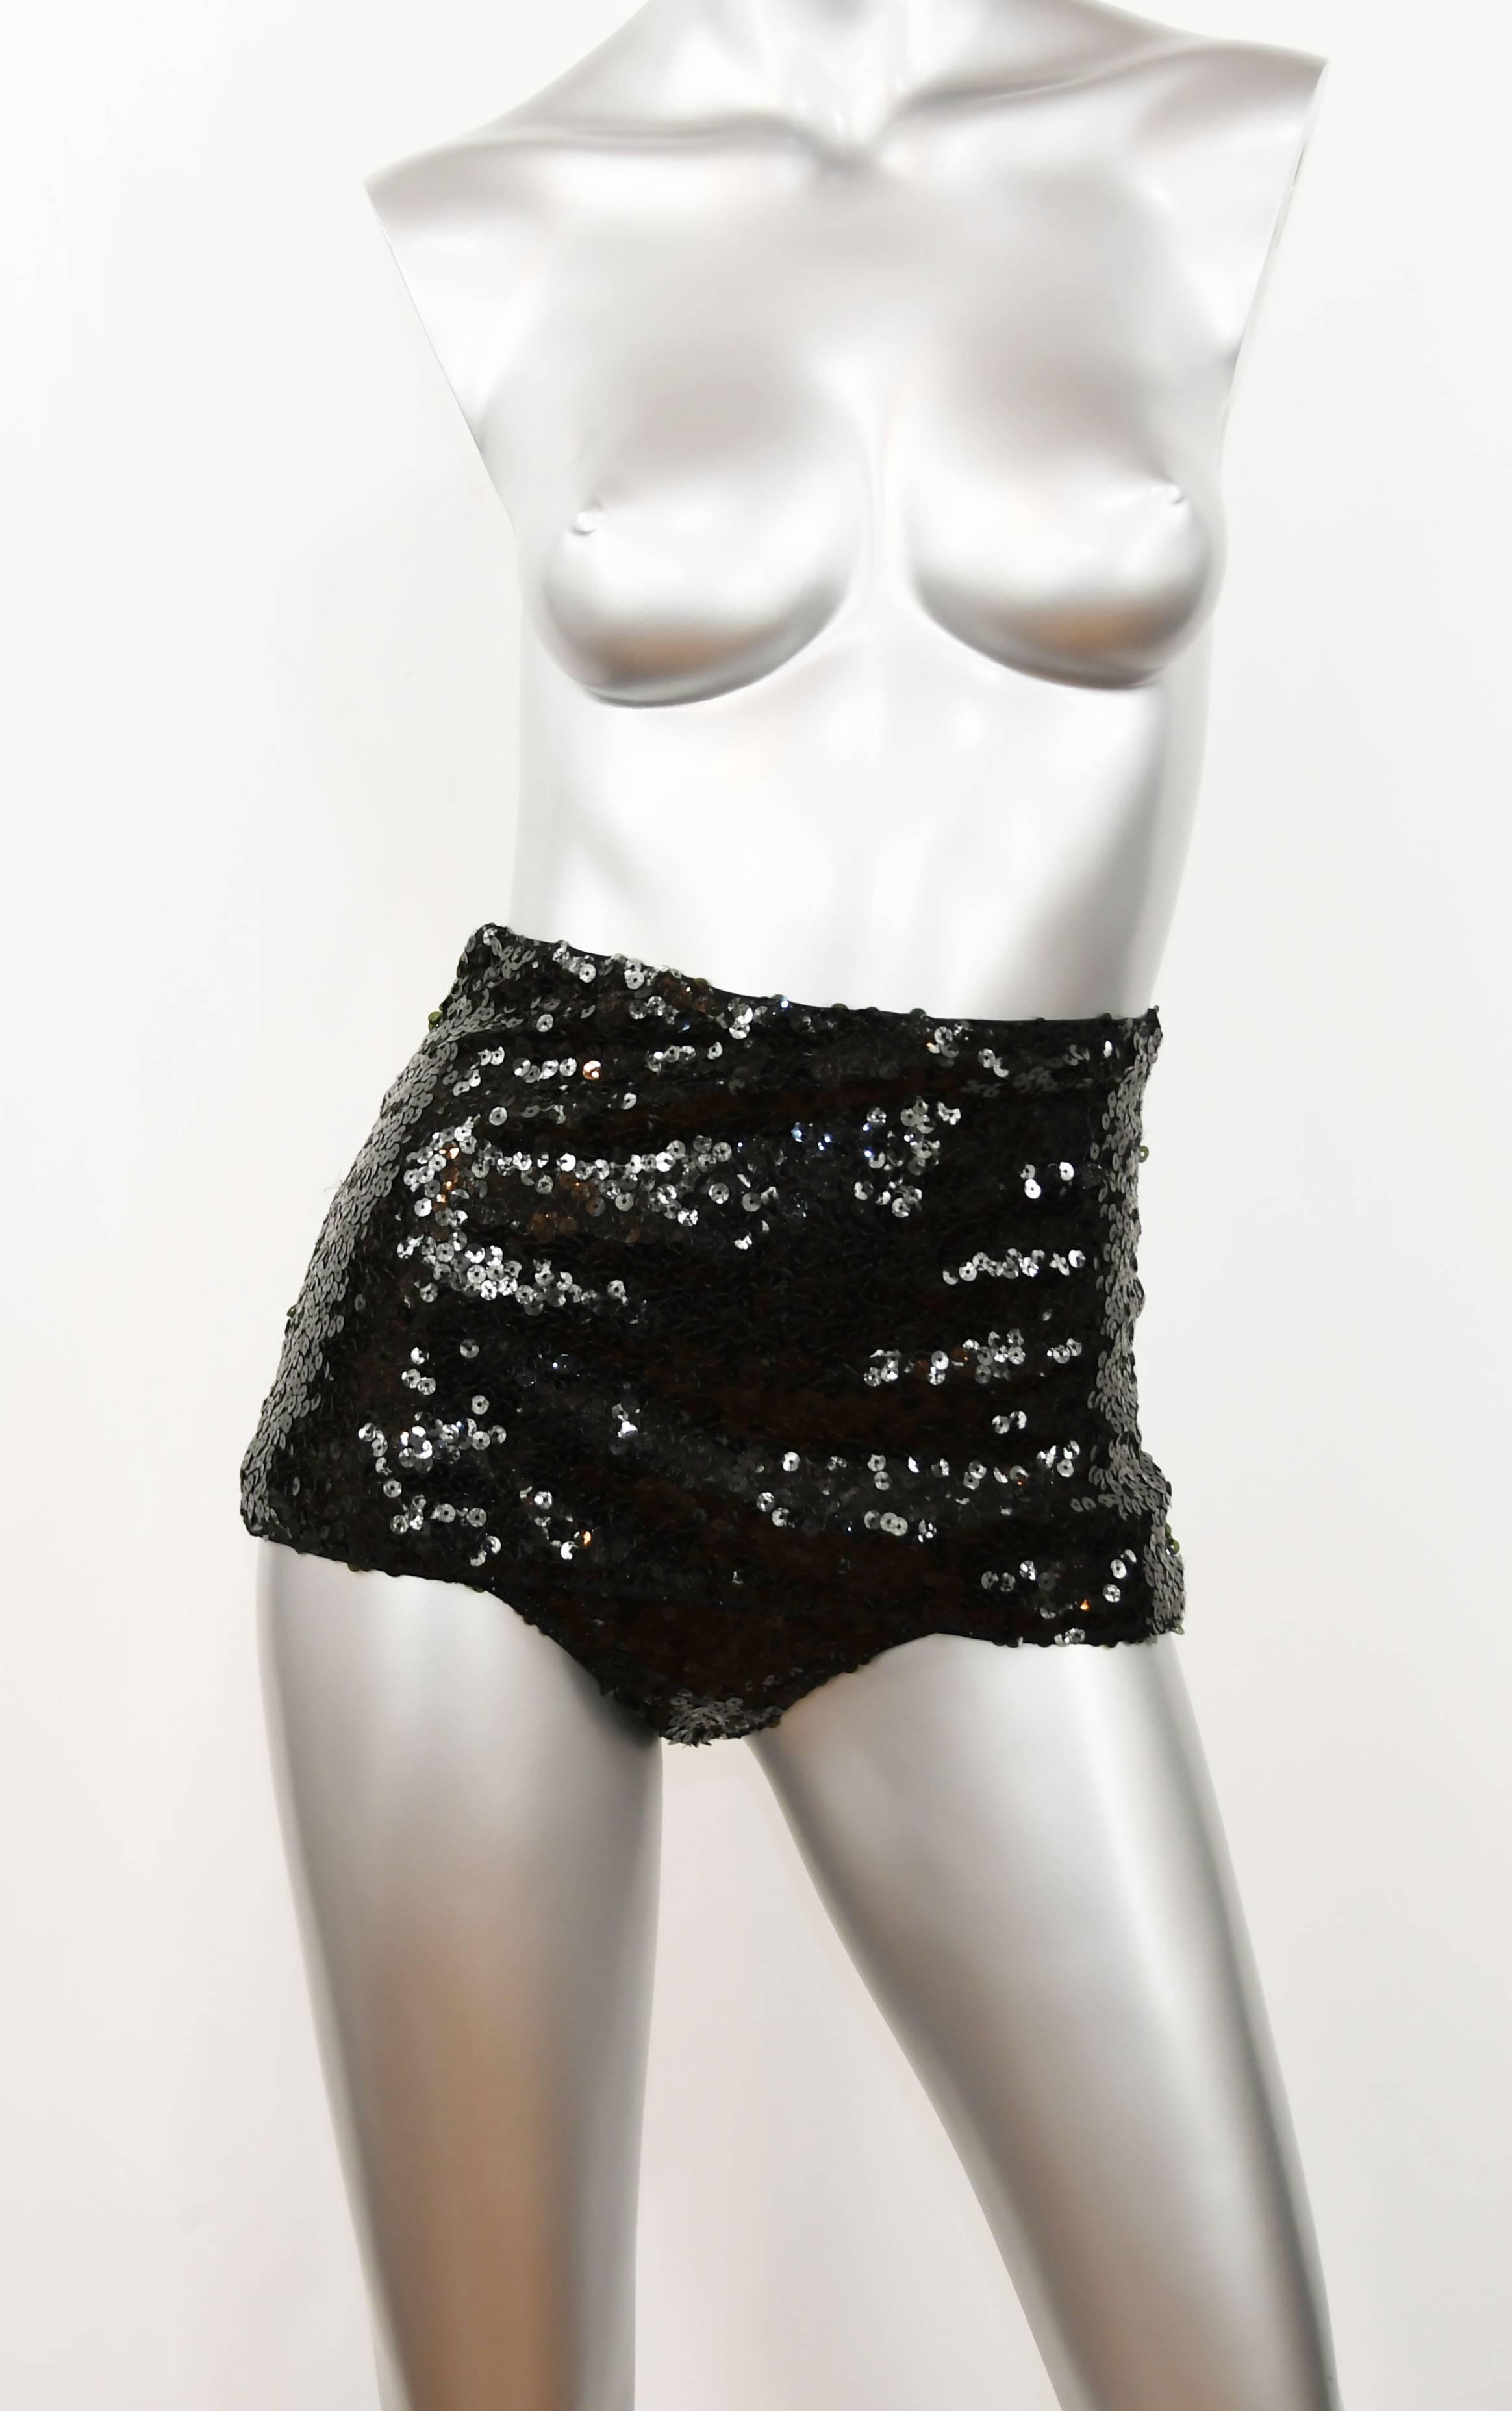 Chanel Black Sequin Short Shorts for a leggy forties showgirl theme from the Spring 2007 Runway, New.  Size FR 36, 38 & 40.